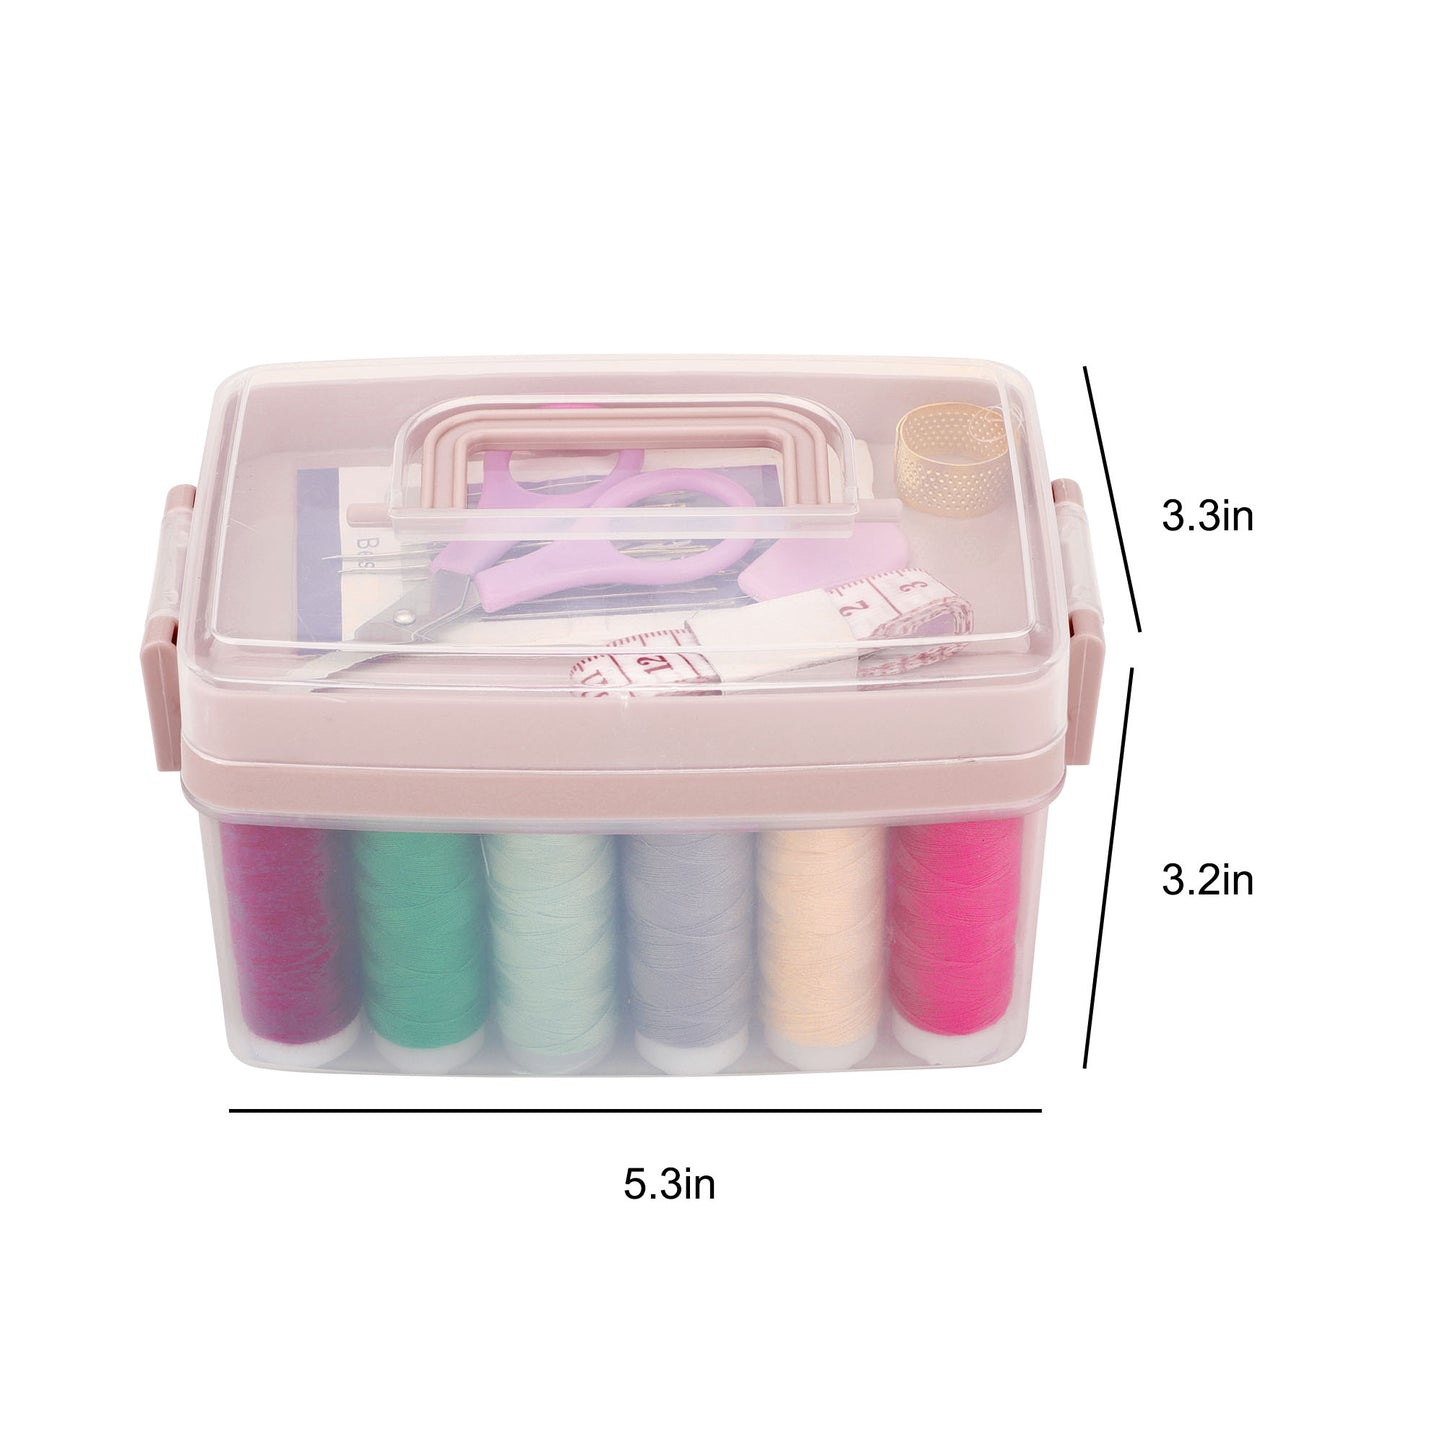 Sewing kits with case 24-Color Spools Thread - Travel Mini Small Sewing Kit,Sewing Tools Sewing Accessories Sewing Supplies for Clothing Repairs